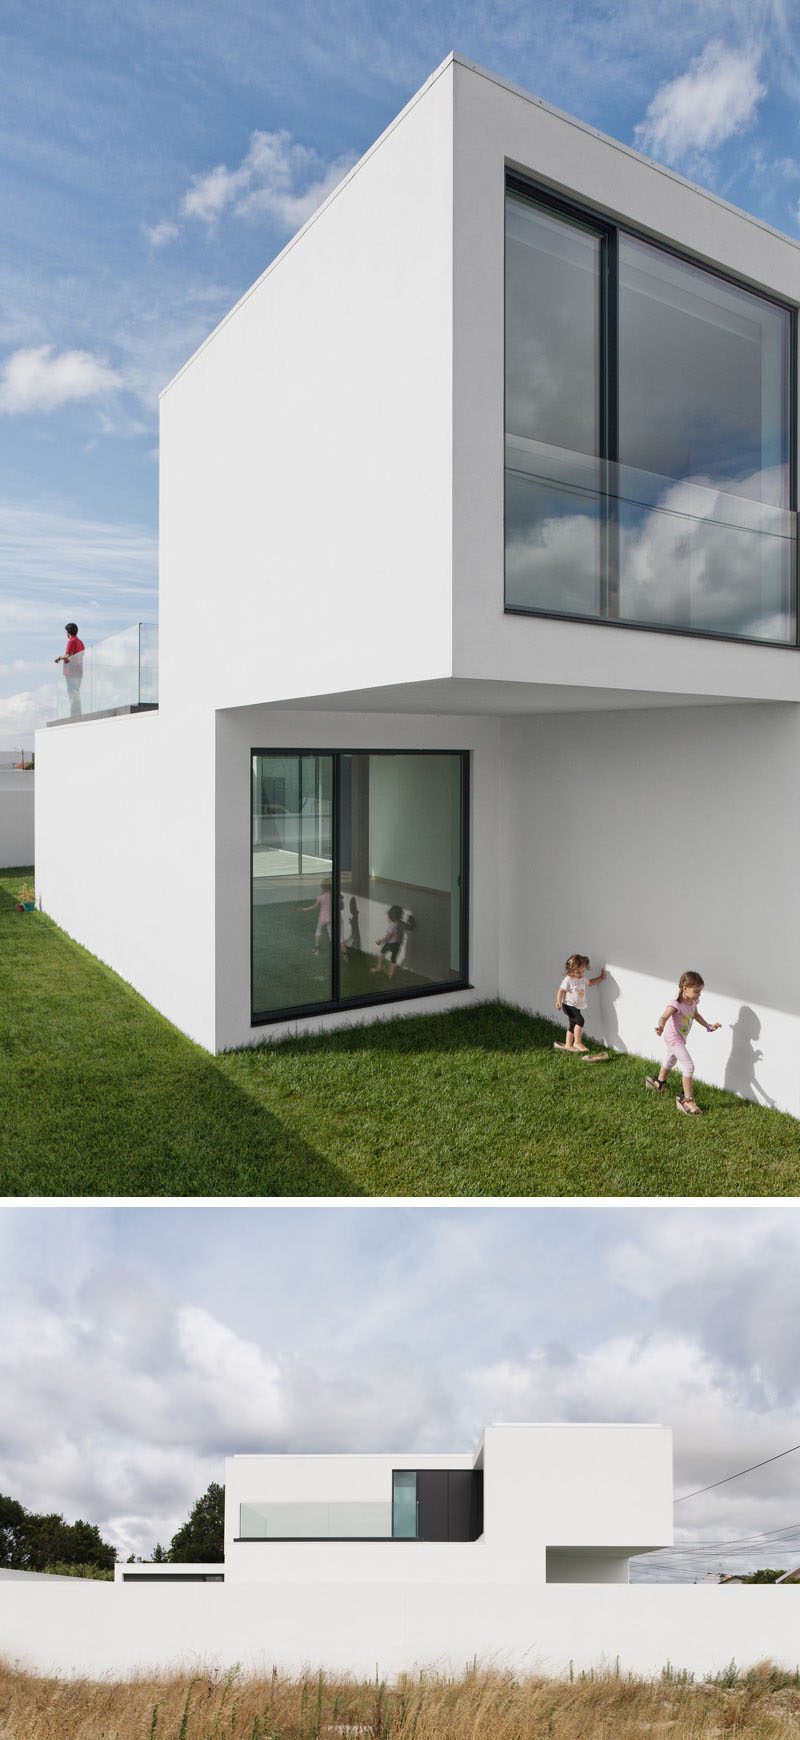 House Exterior Colors - 11 Modern White Houses From Around The World // Other than a few black window frames and doors, the outside of this family home is completely white.